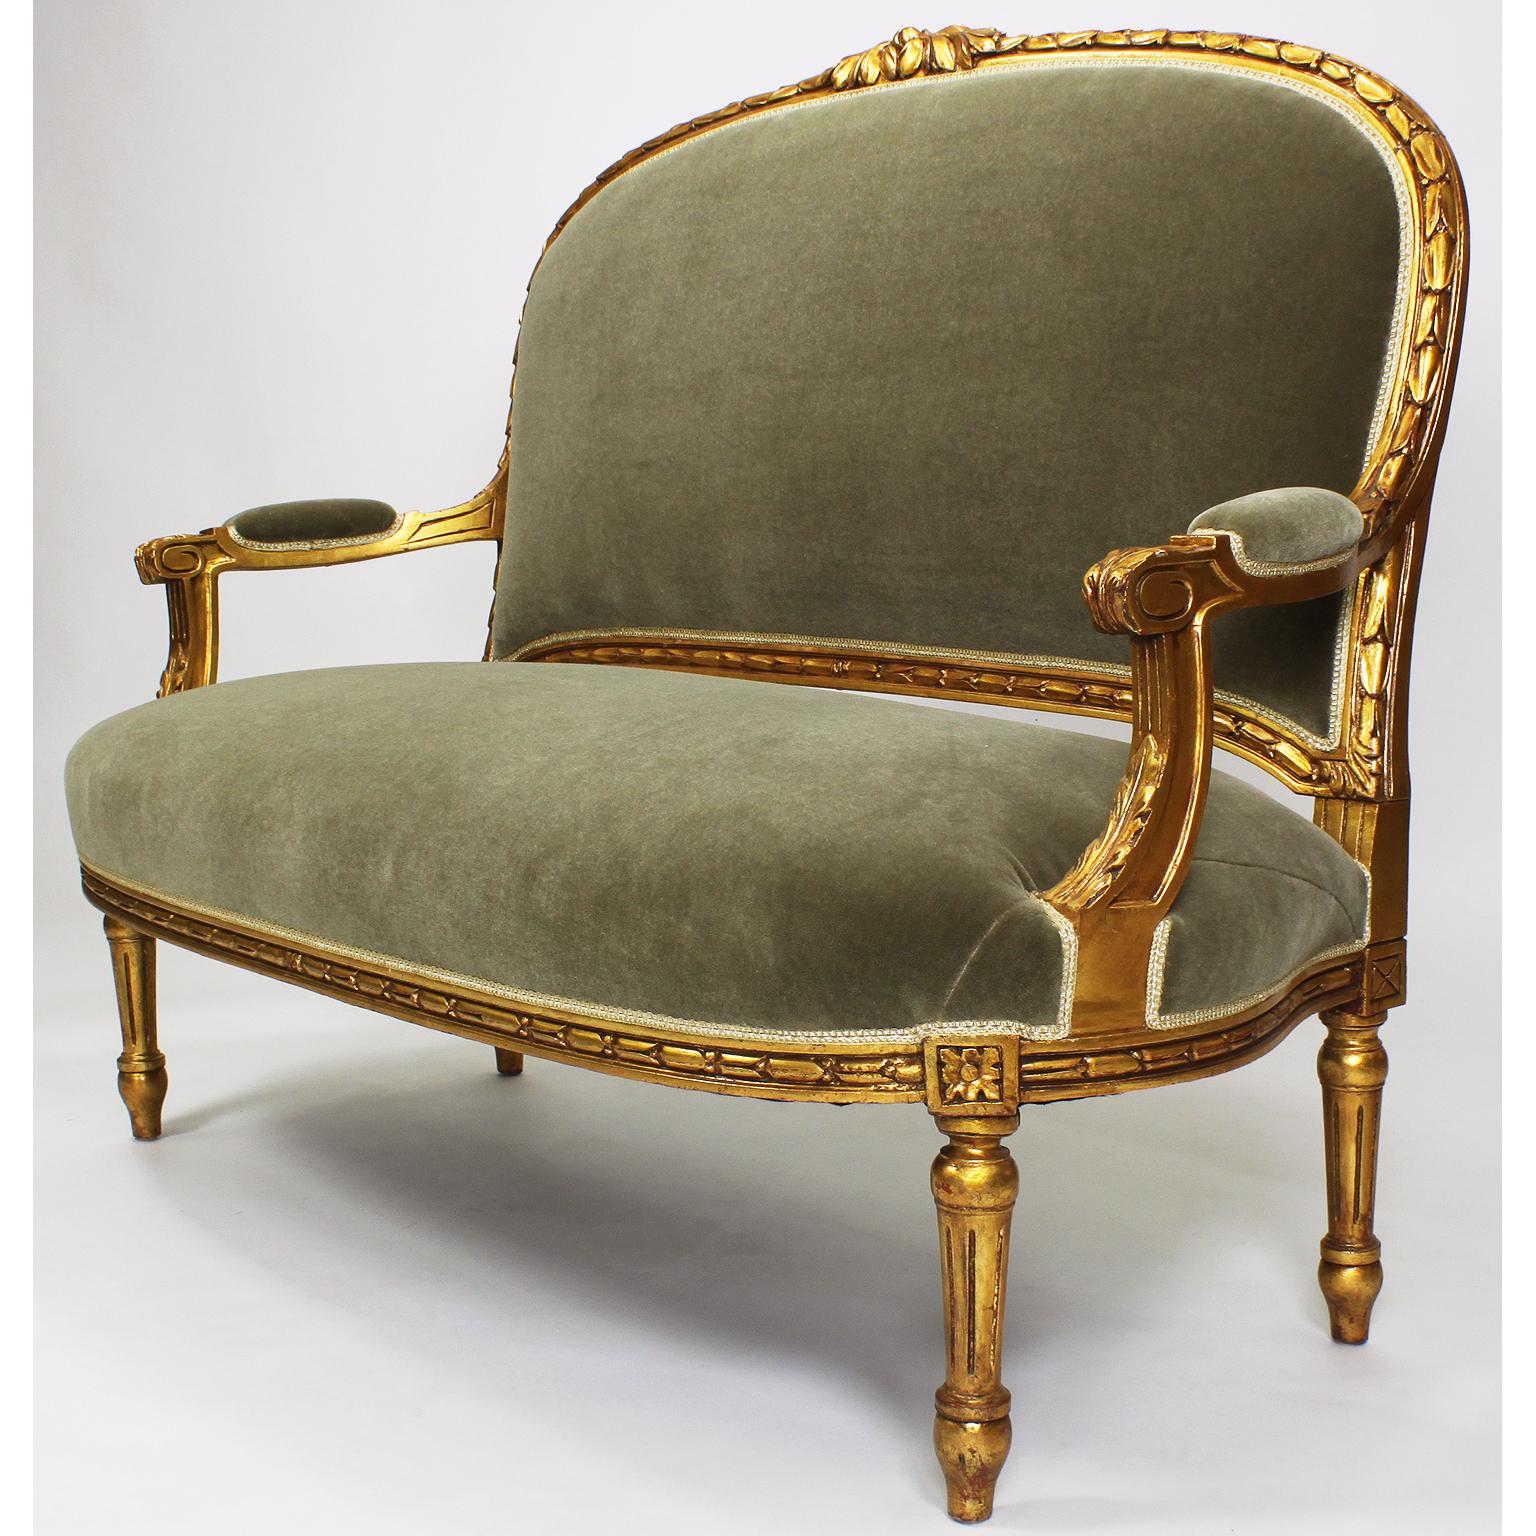 A five piece French Louis XVI style giltwood carved Salon 'Parlor' Suite. The carved gilded wood frame with a floral design and leaves, with padded open armrests and raised on four fluted legs, all upholstered in a recent green velvet, Paris, circa